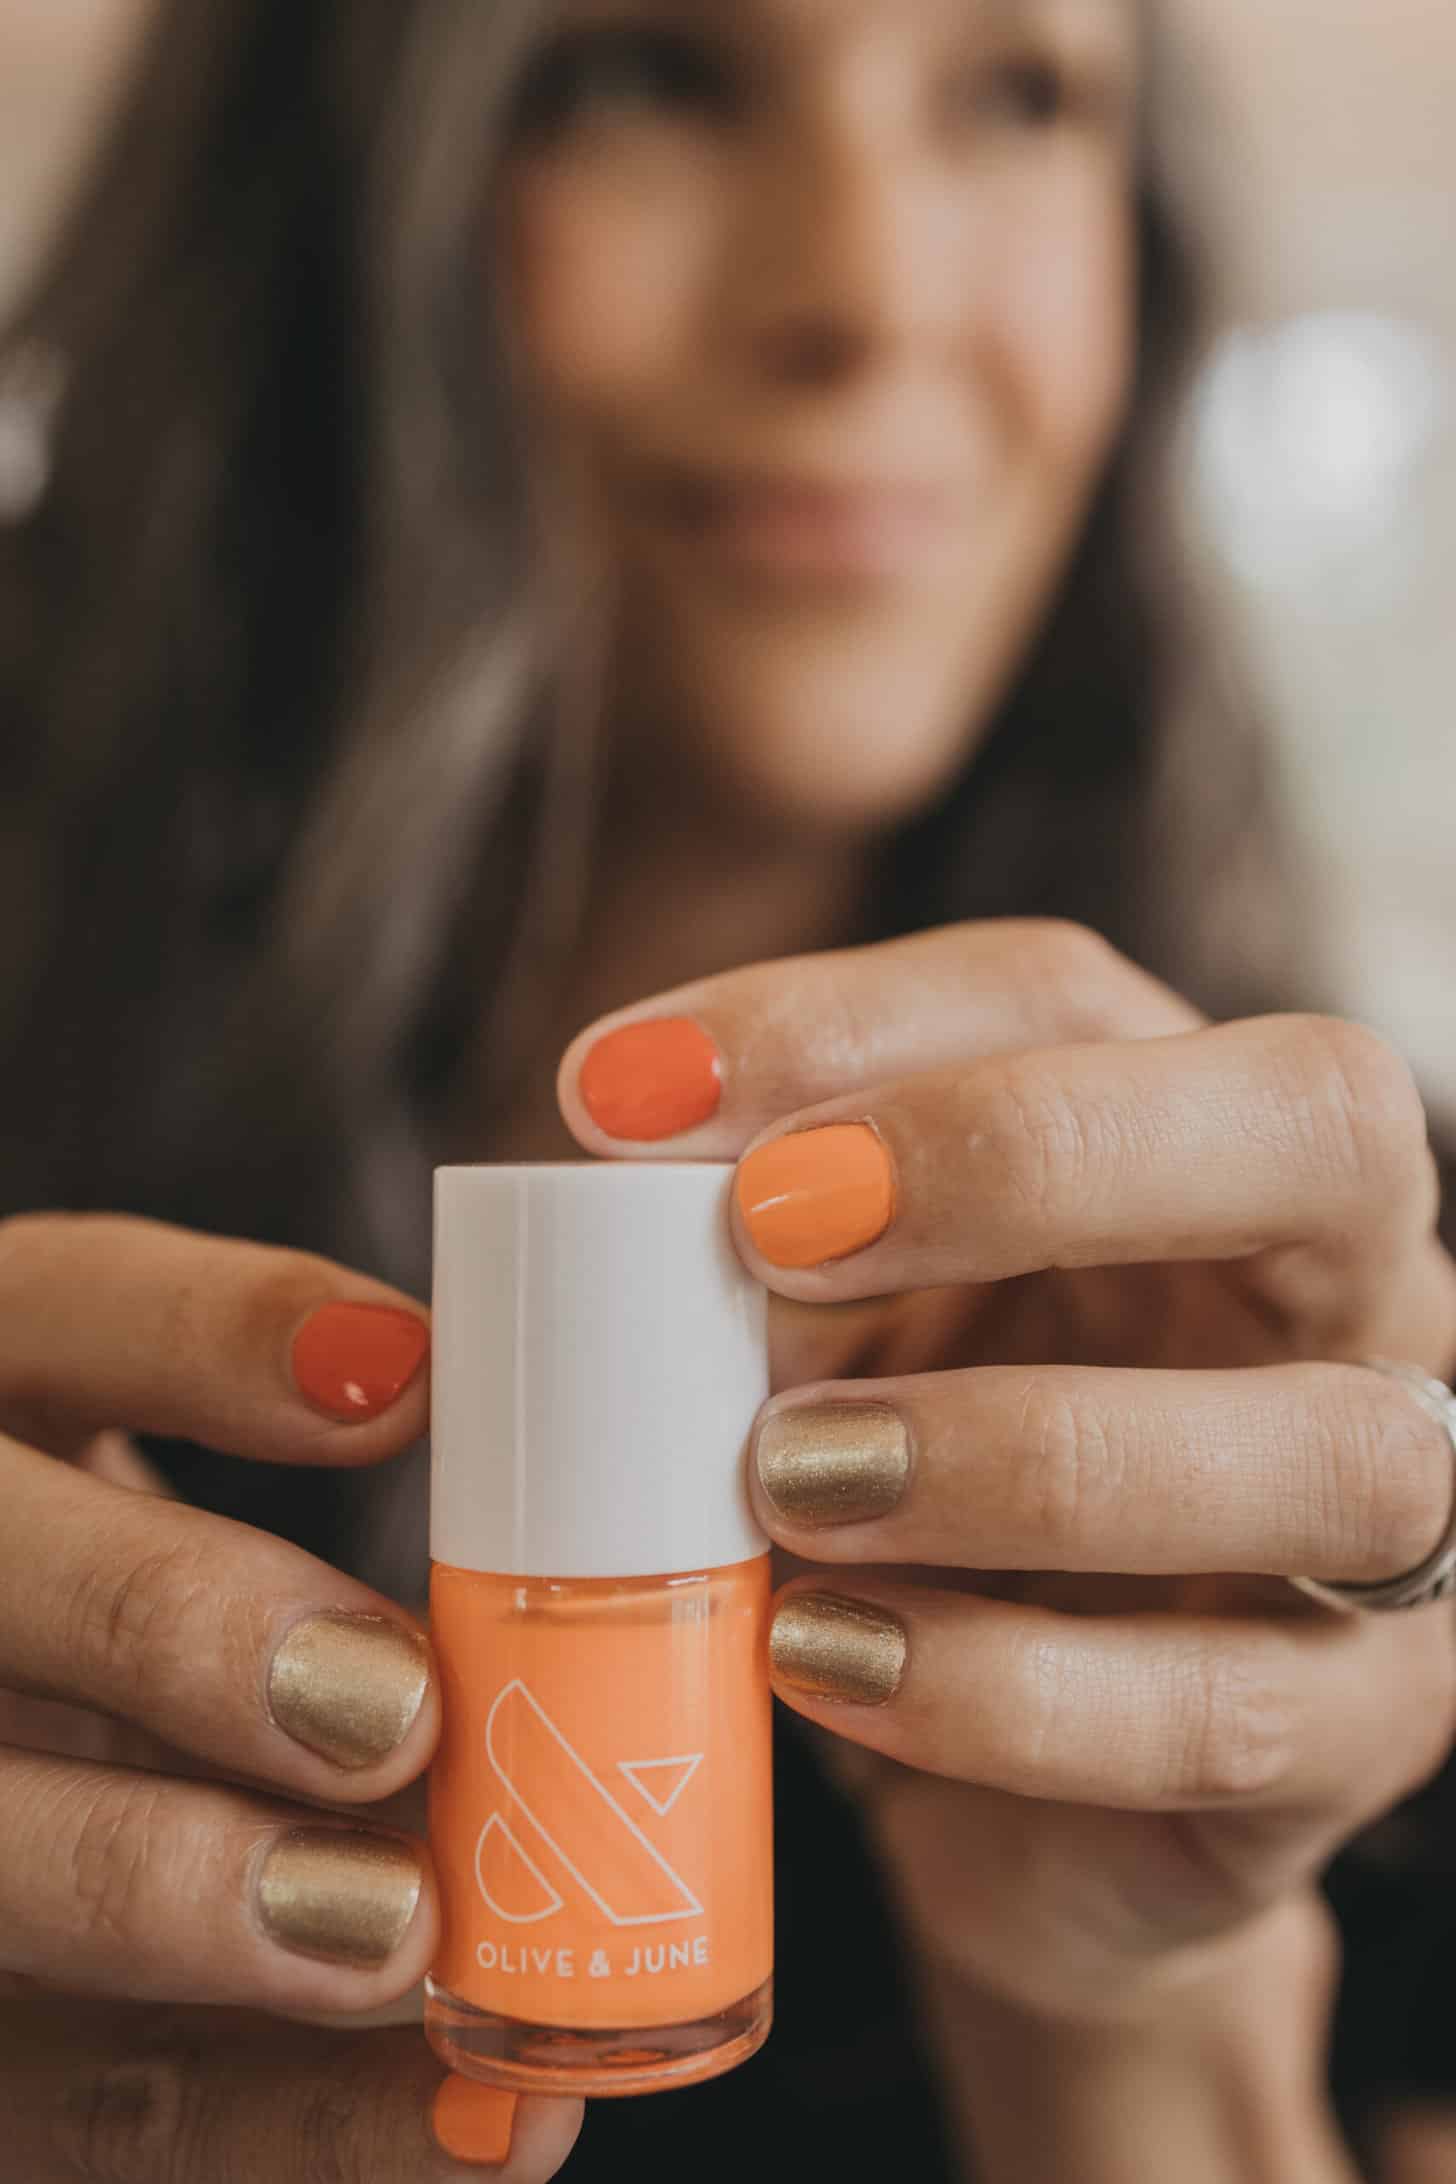 a woman holds up a bottle of orange nail polish from olive and june